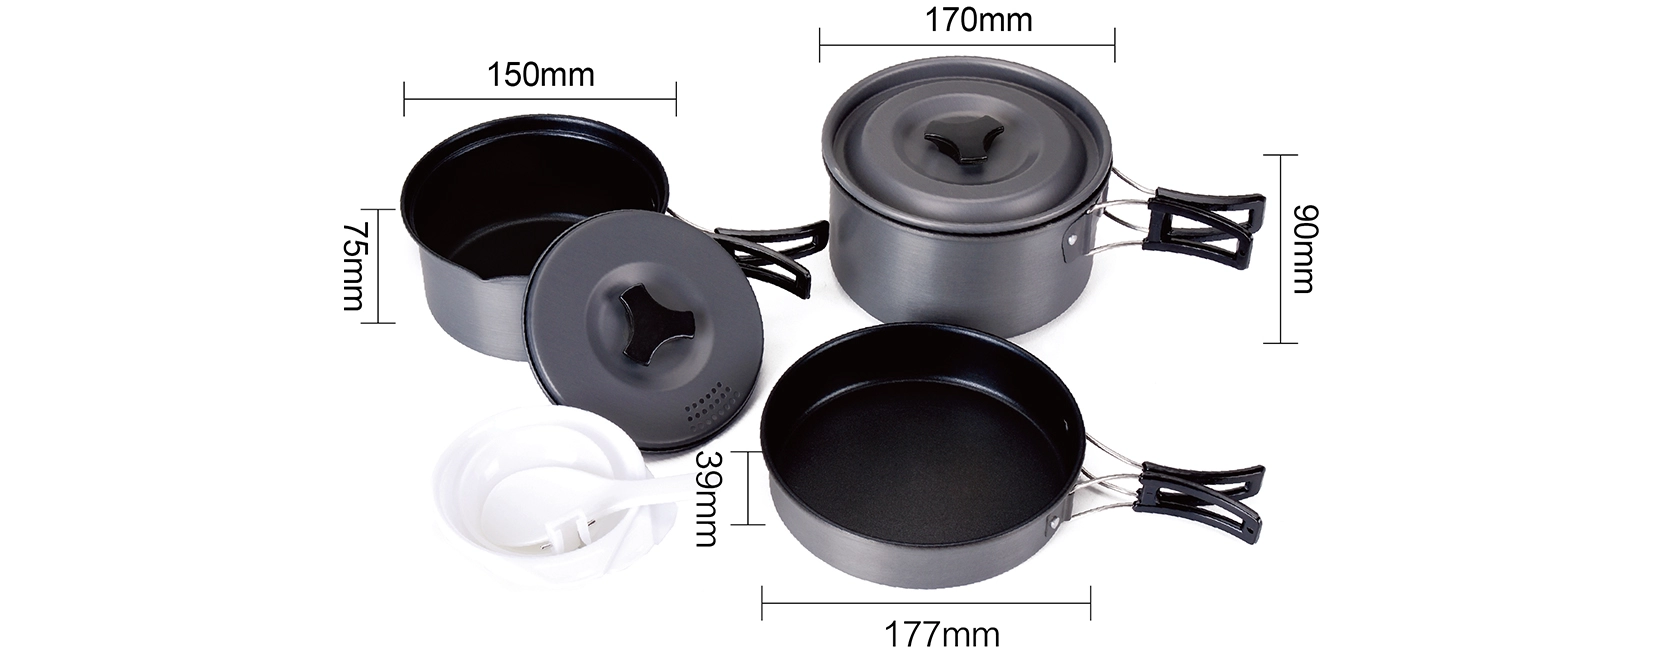 details of Lightweight Non-Stick Camping Cookware Set For Outdoor Picnic